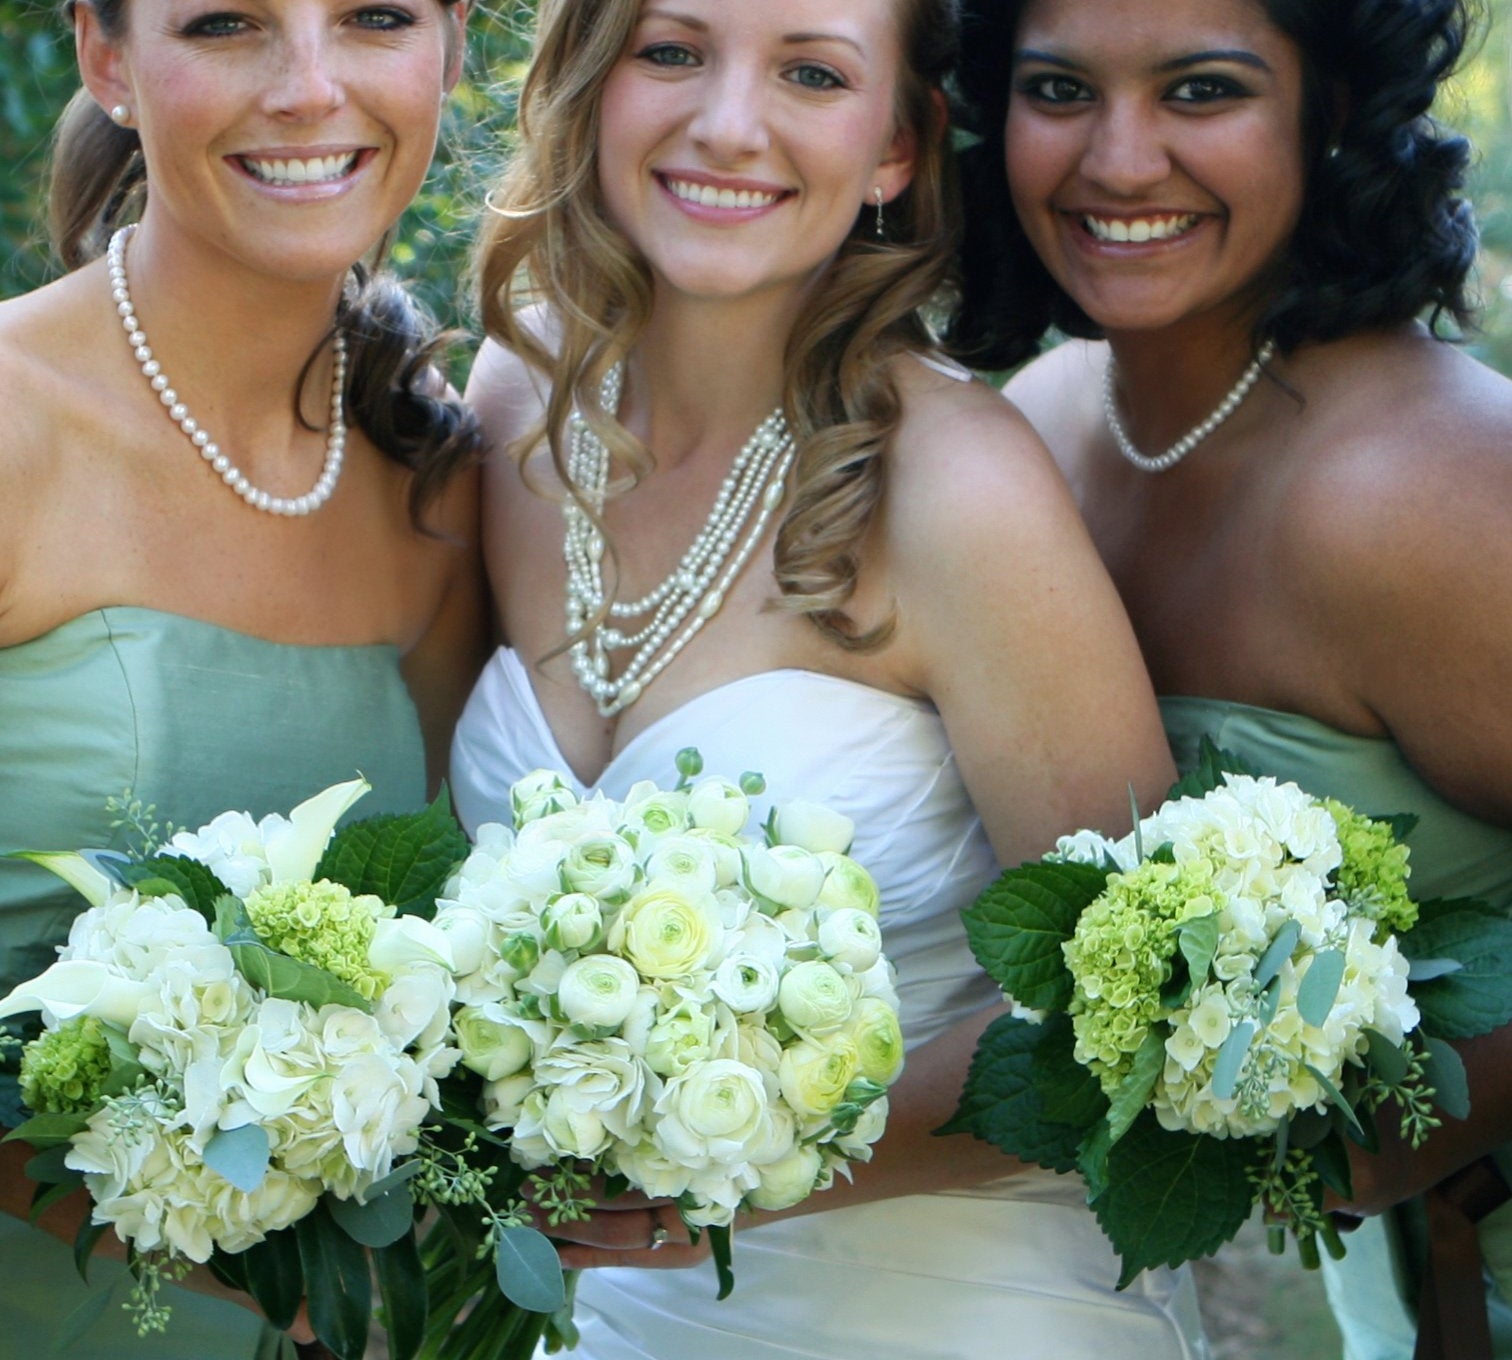 Bridal party wearing necklaces